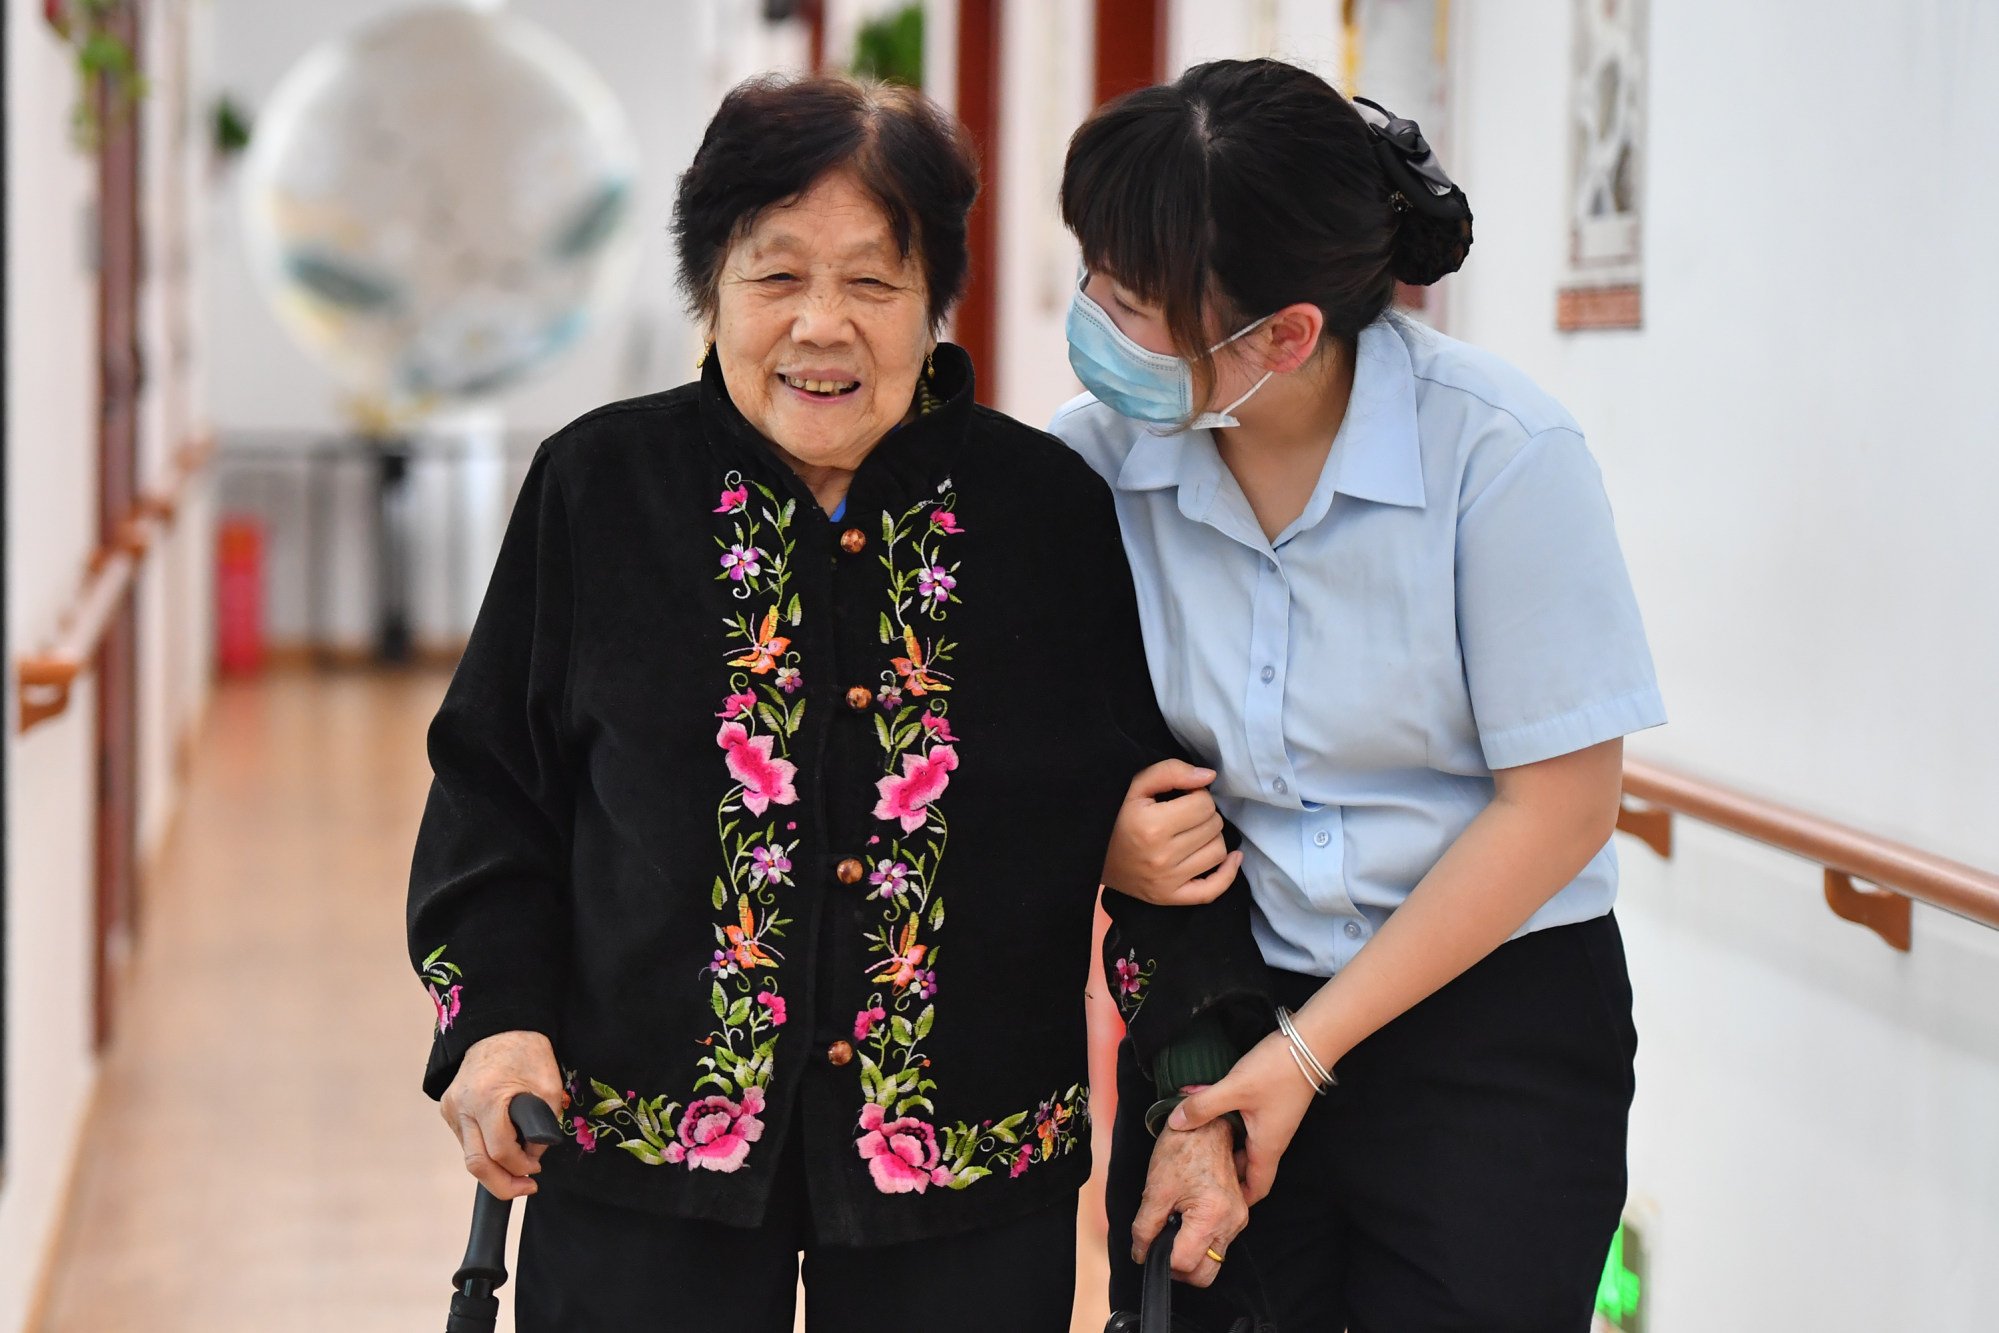 A nursing worker helps an elderly woman walk at an elderly care service centre in Yuhu District of Xiangtan City in Hunan Province on May 17, 2022. Photo: Xinhua